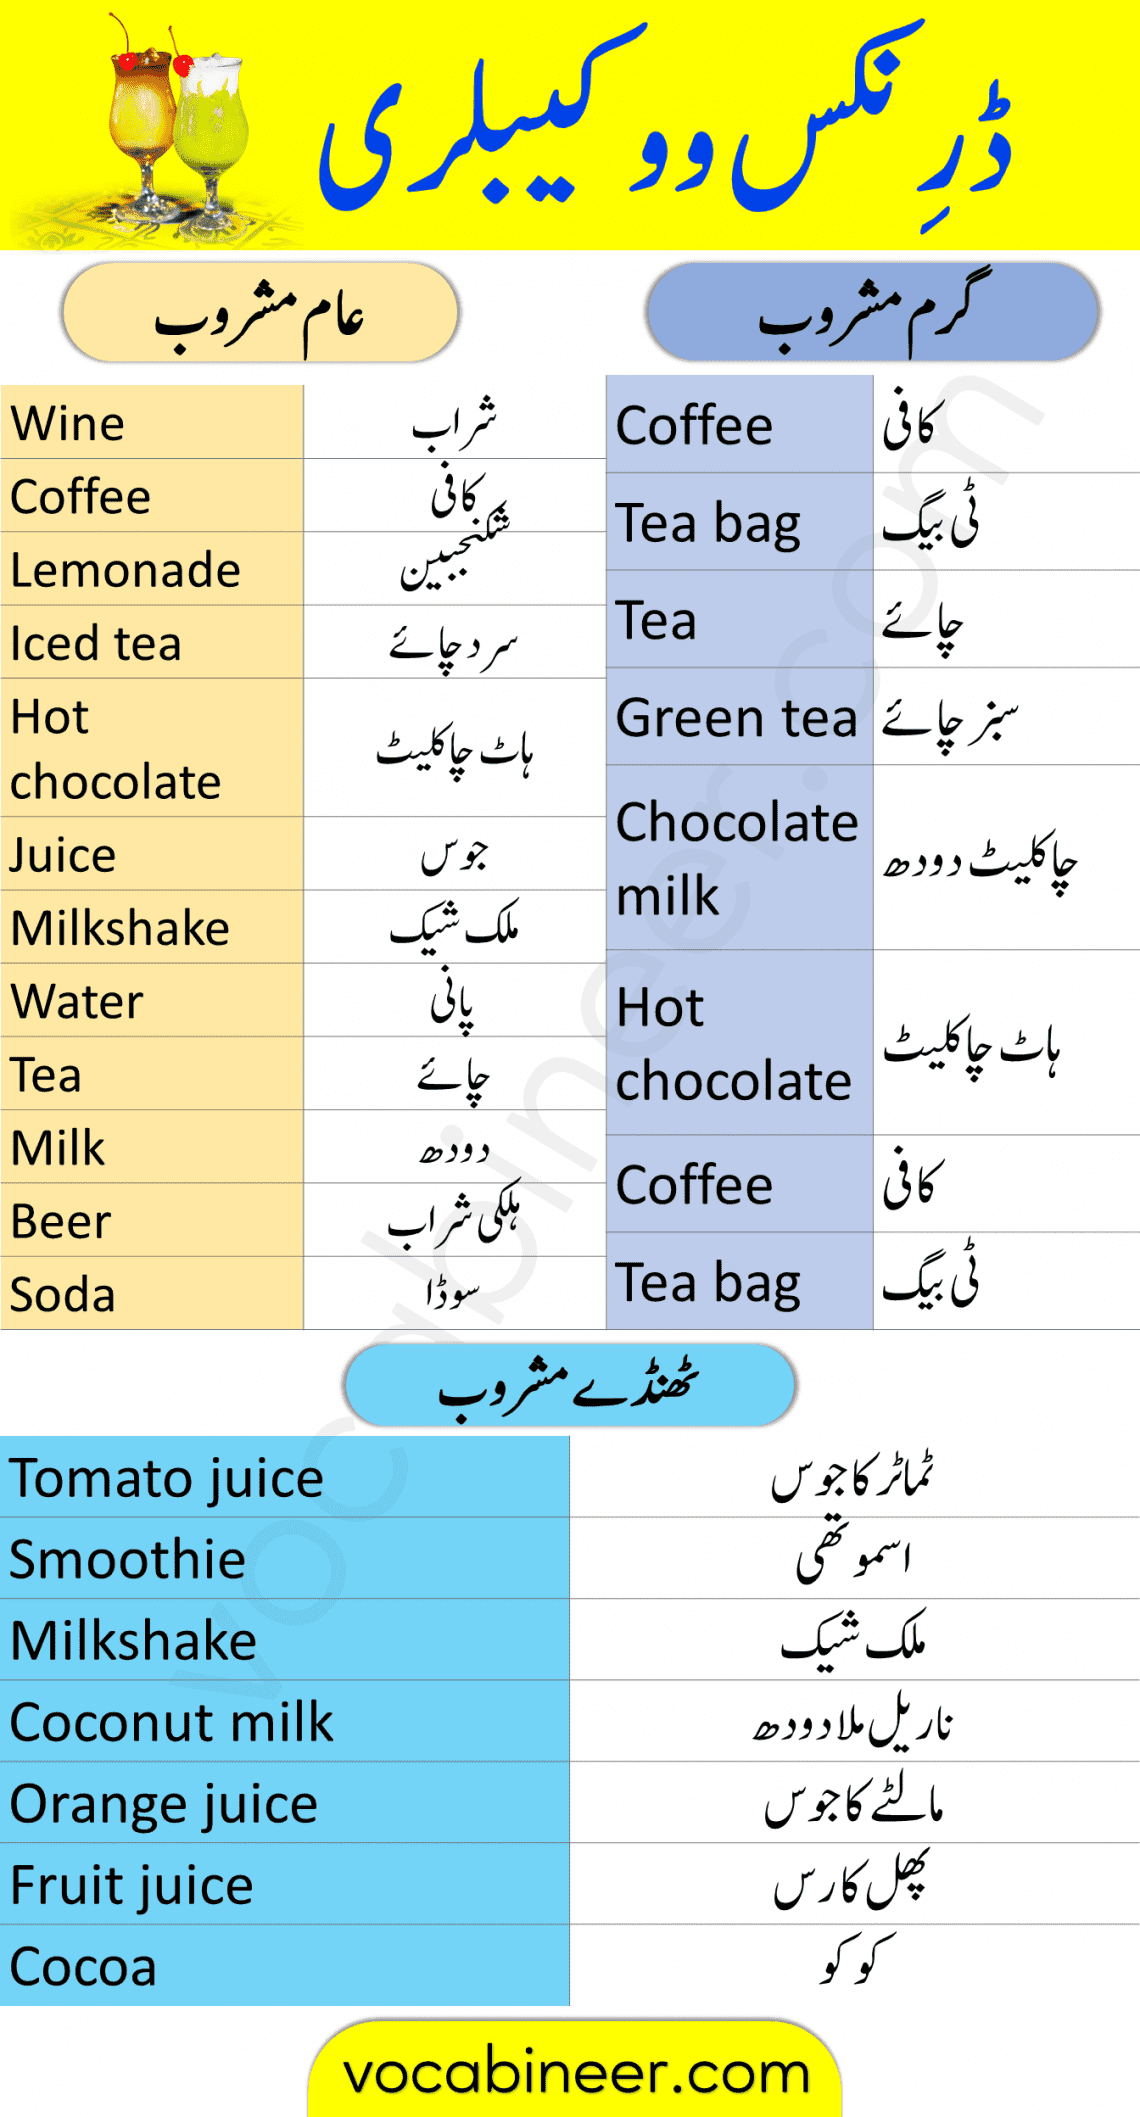 Drink Names Vocabulary Words List with Urdu Meanings